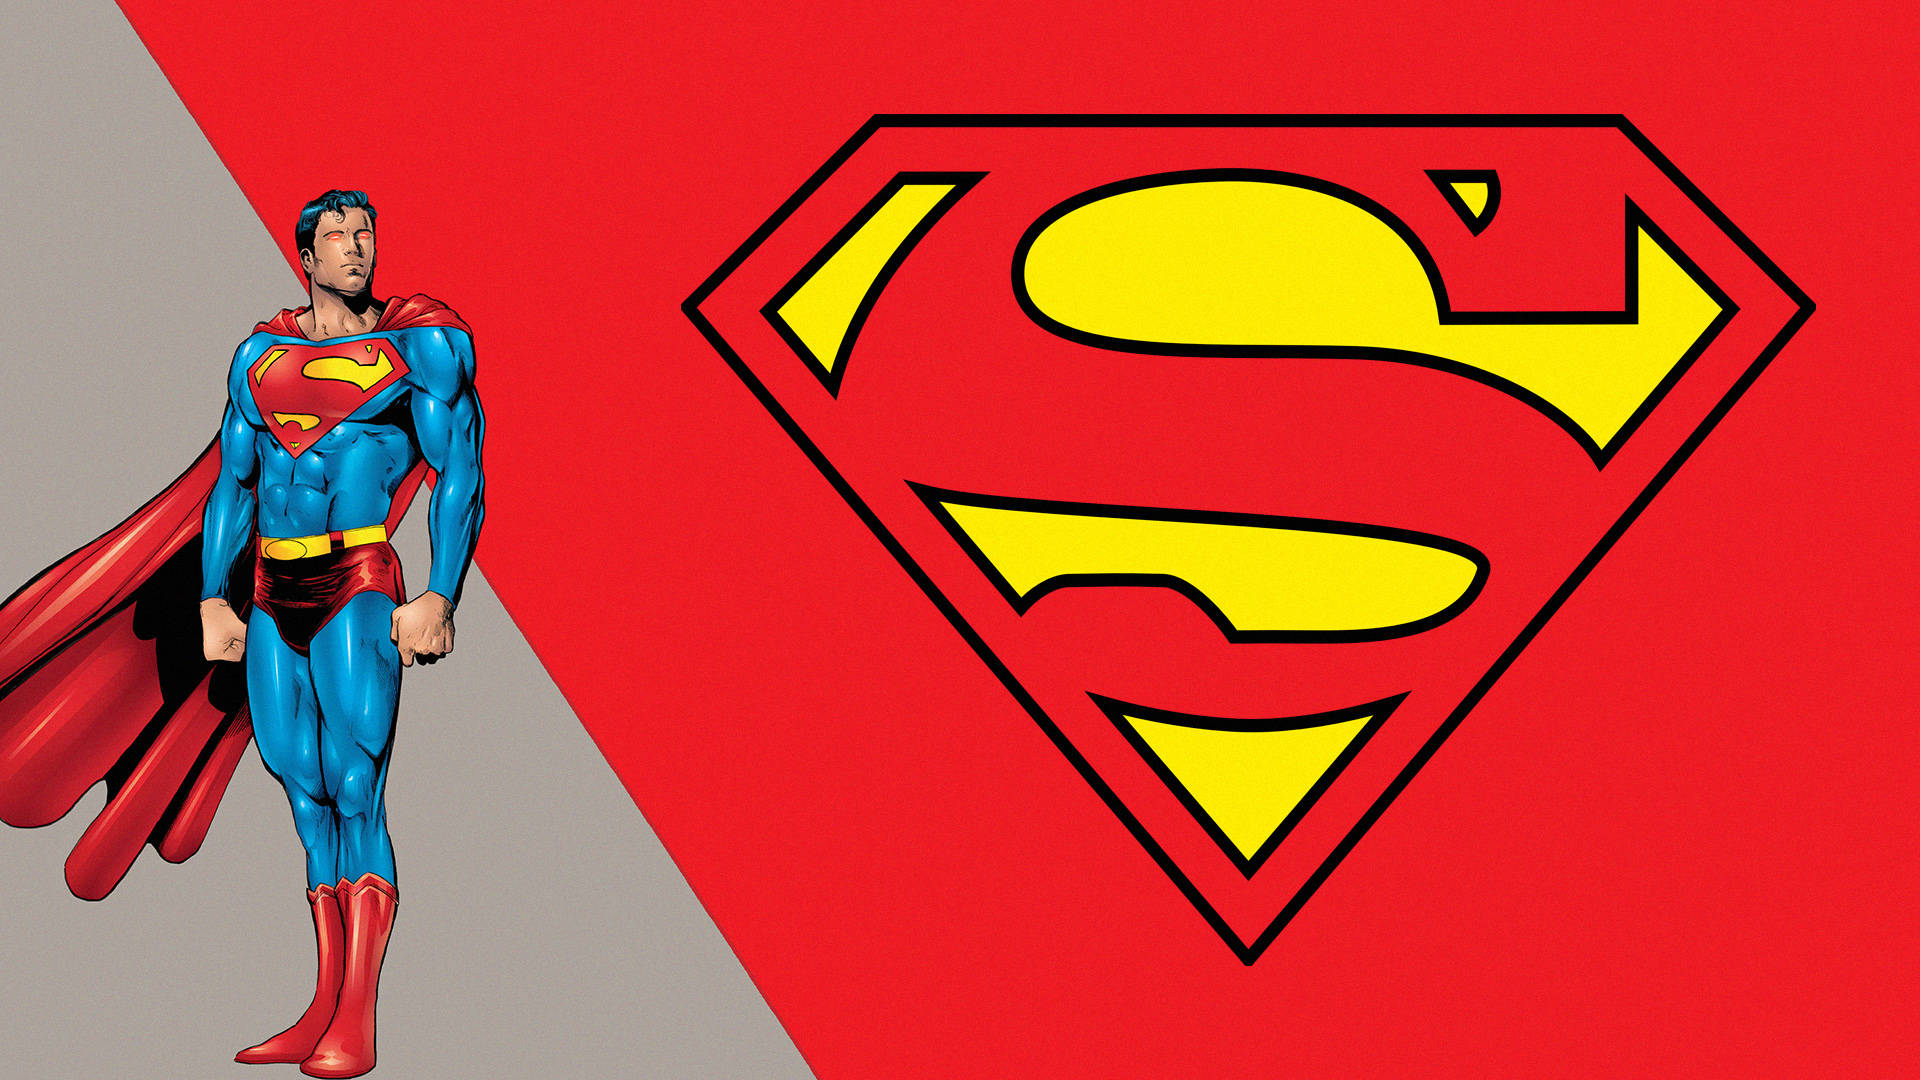 Free Superman Wallpaper Downloads, [300+] Superman Wallpapers for FREE |  